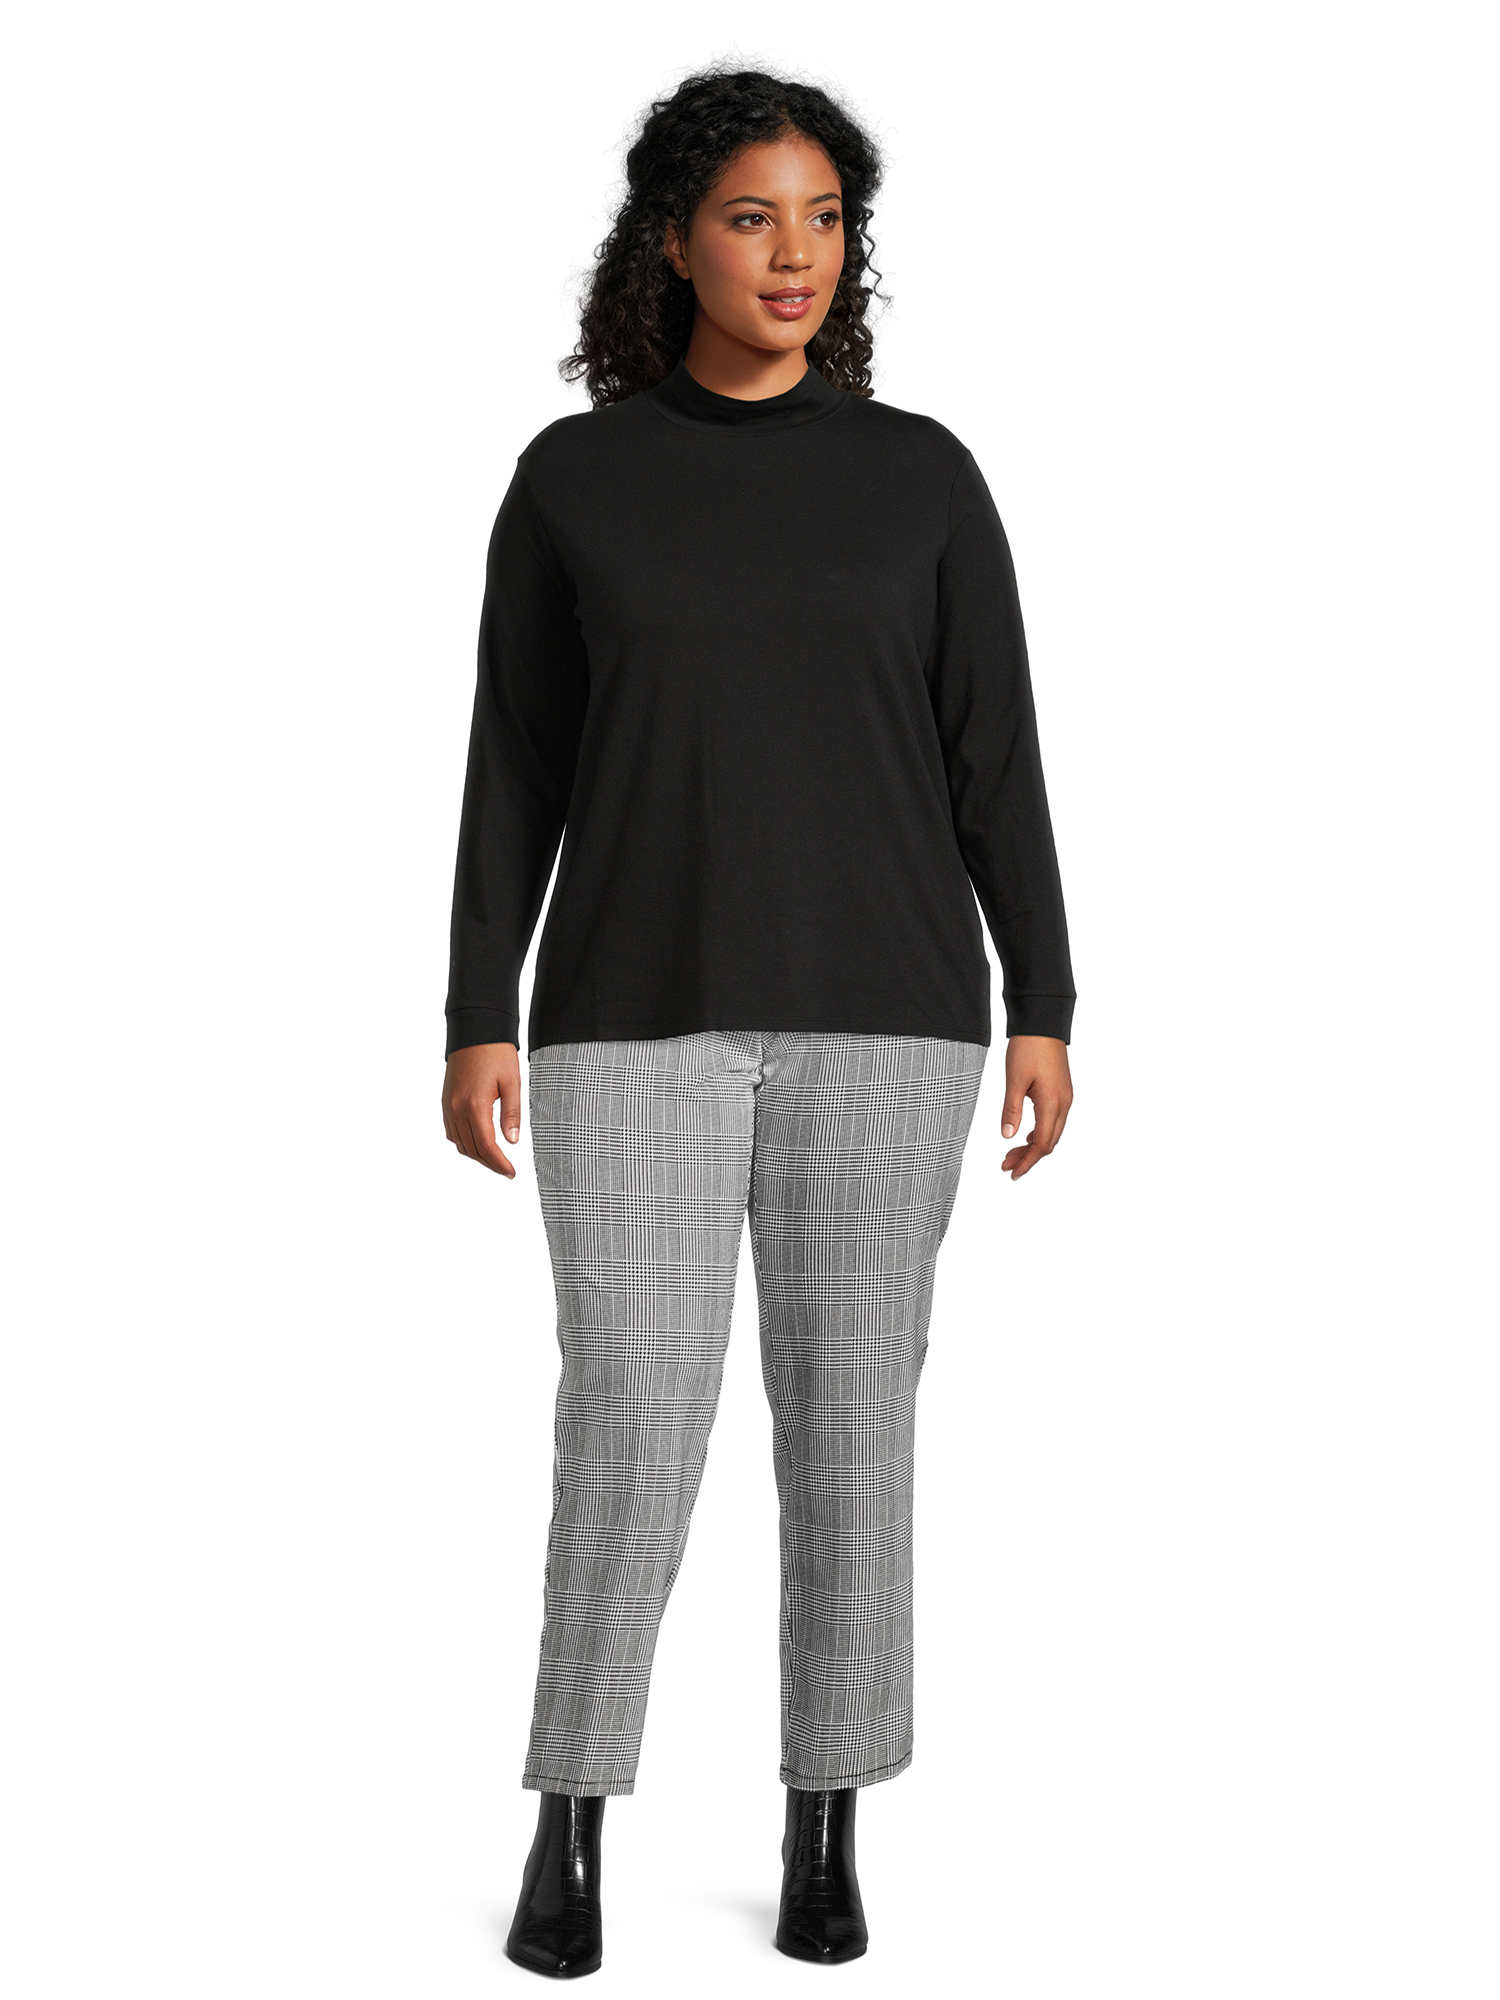 Just My Size Women's Plus 2 Pocket Pull-On Pant - image 3 of 6